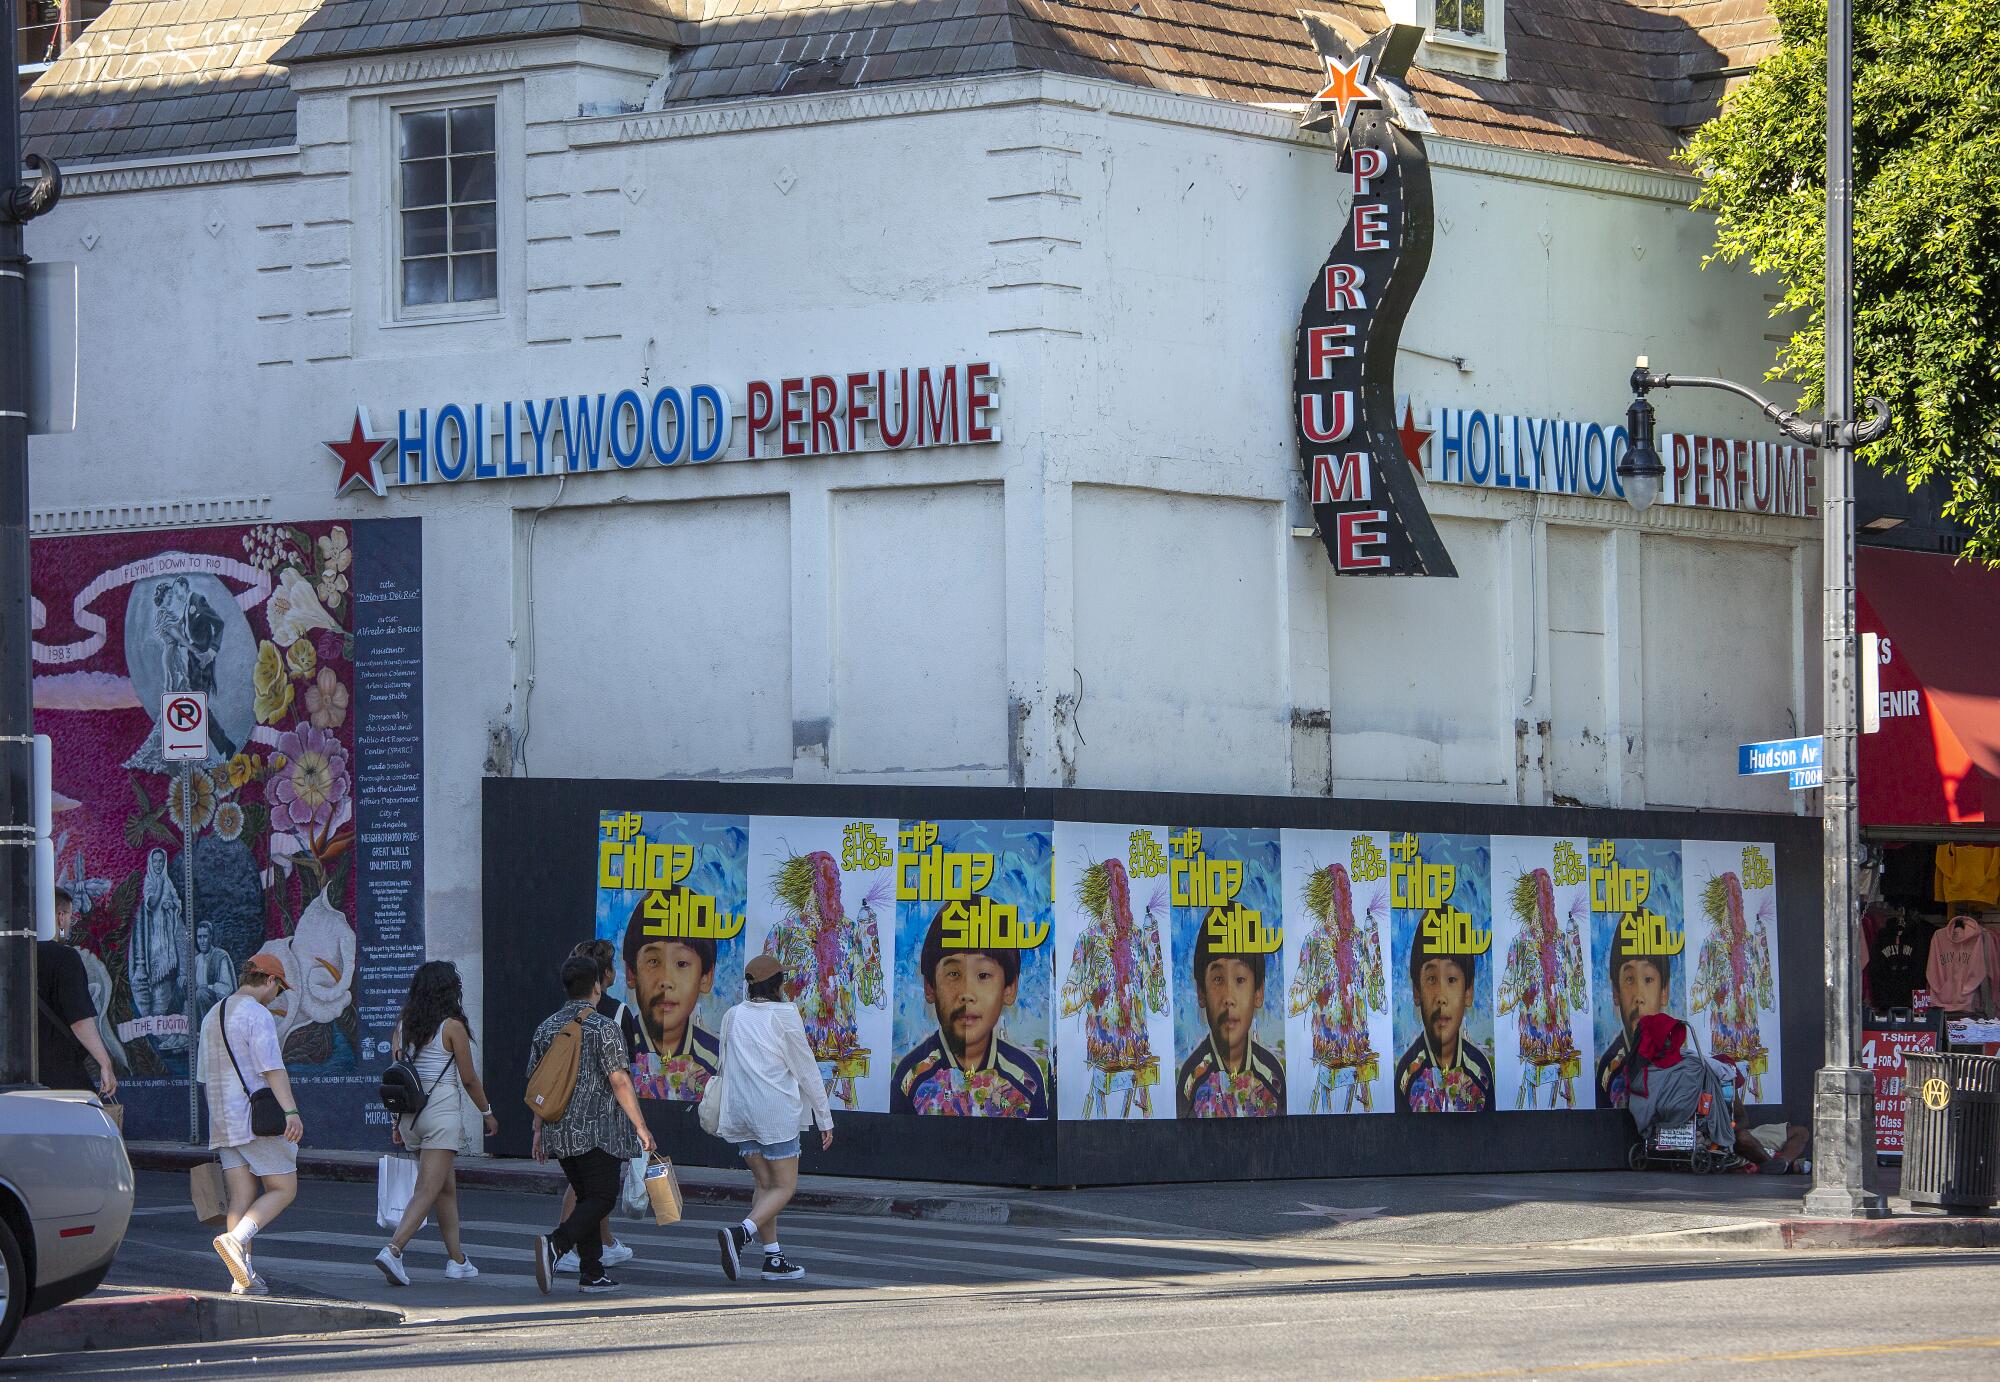 People walk past a boarded up storefront on Hollywood Boulevard in Hollywood.